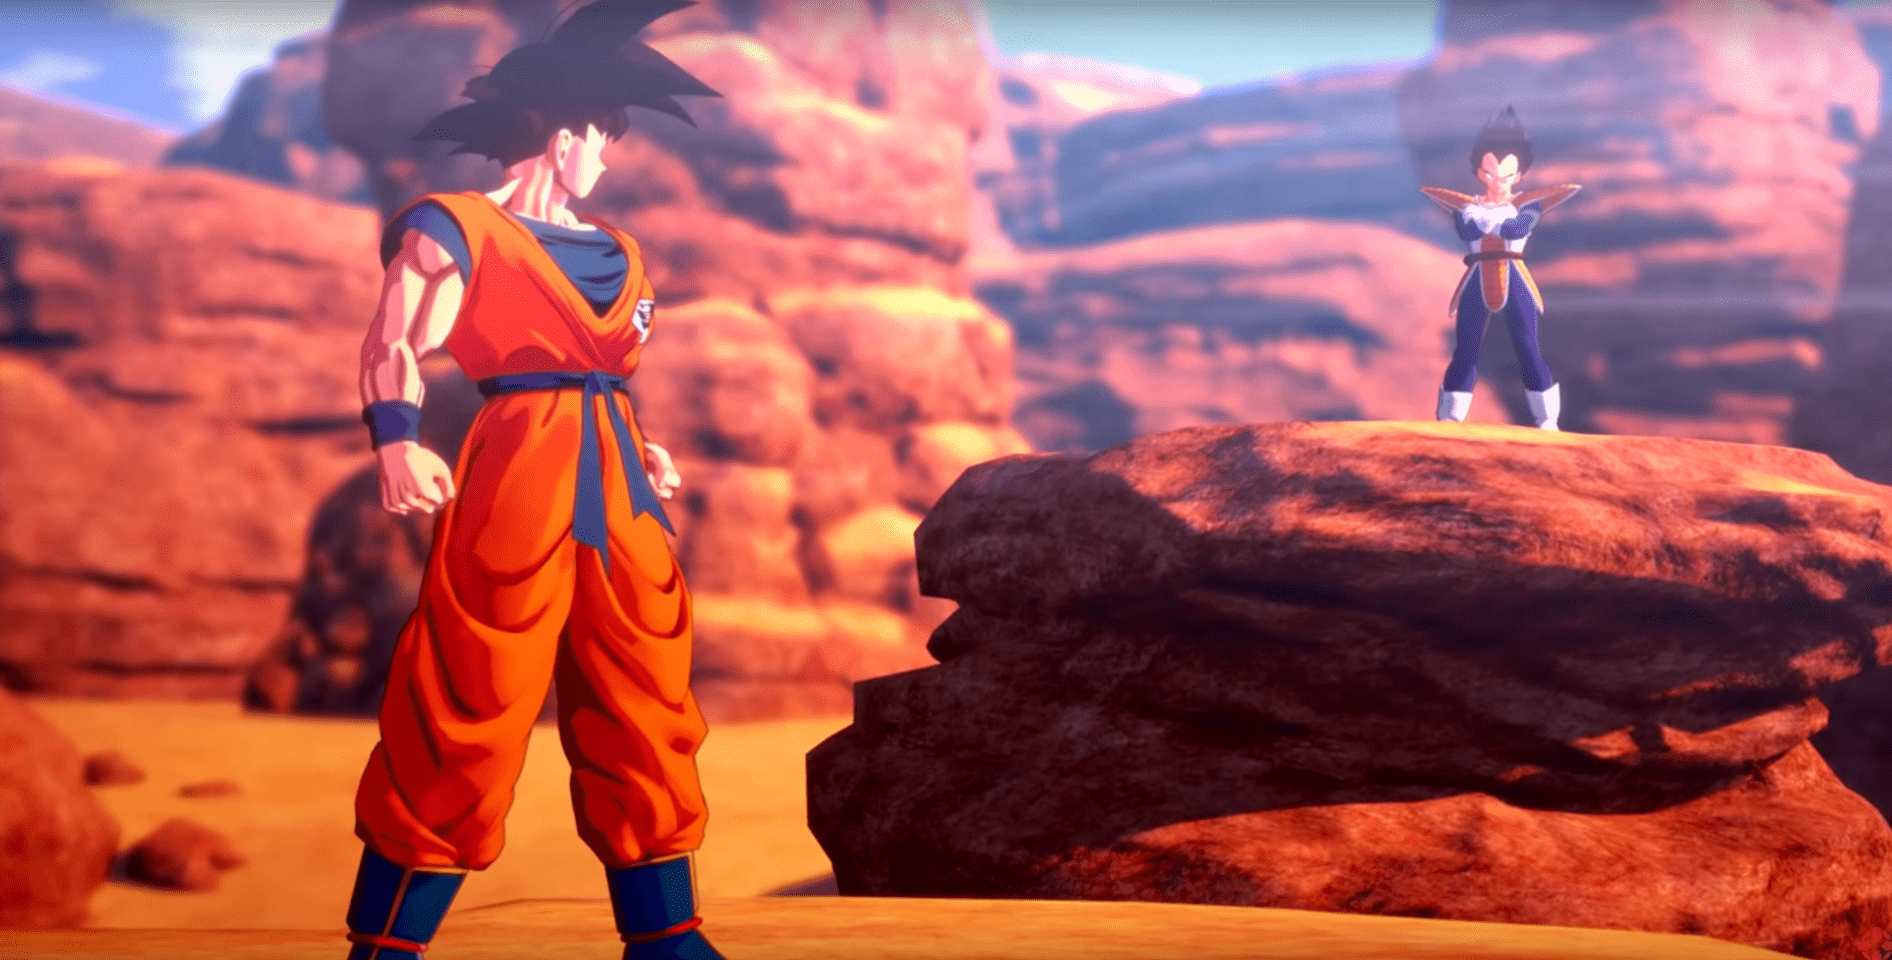 Dragon Ball Z: Kakaraot Gameplay Video Shows Off One Of The Greatest Battles In The Franchise, The First Fight Between Goku And Vegeta